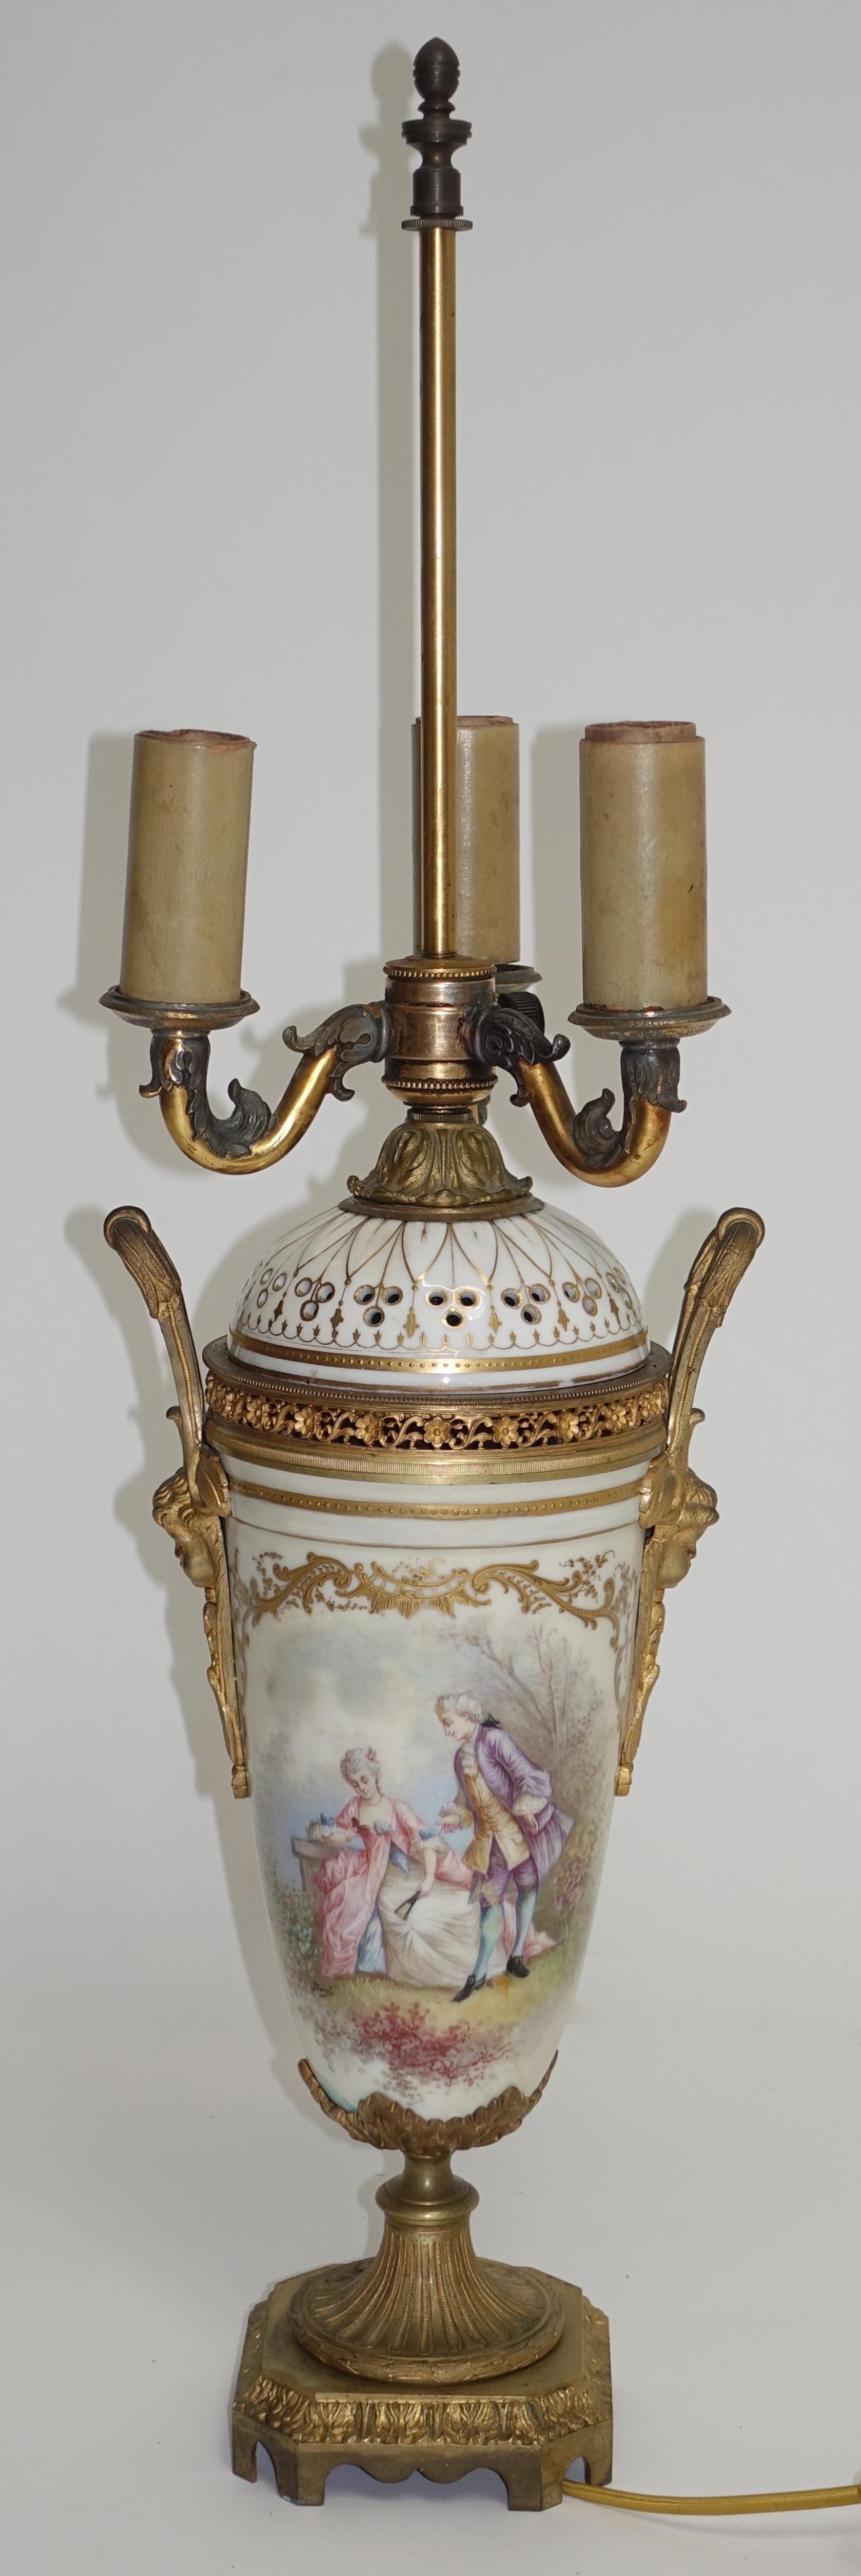 19th Century Sèvres Porcelain and Ormolu Covered Urn/Lamp 2